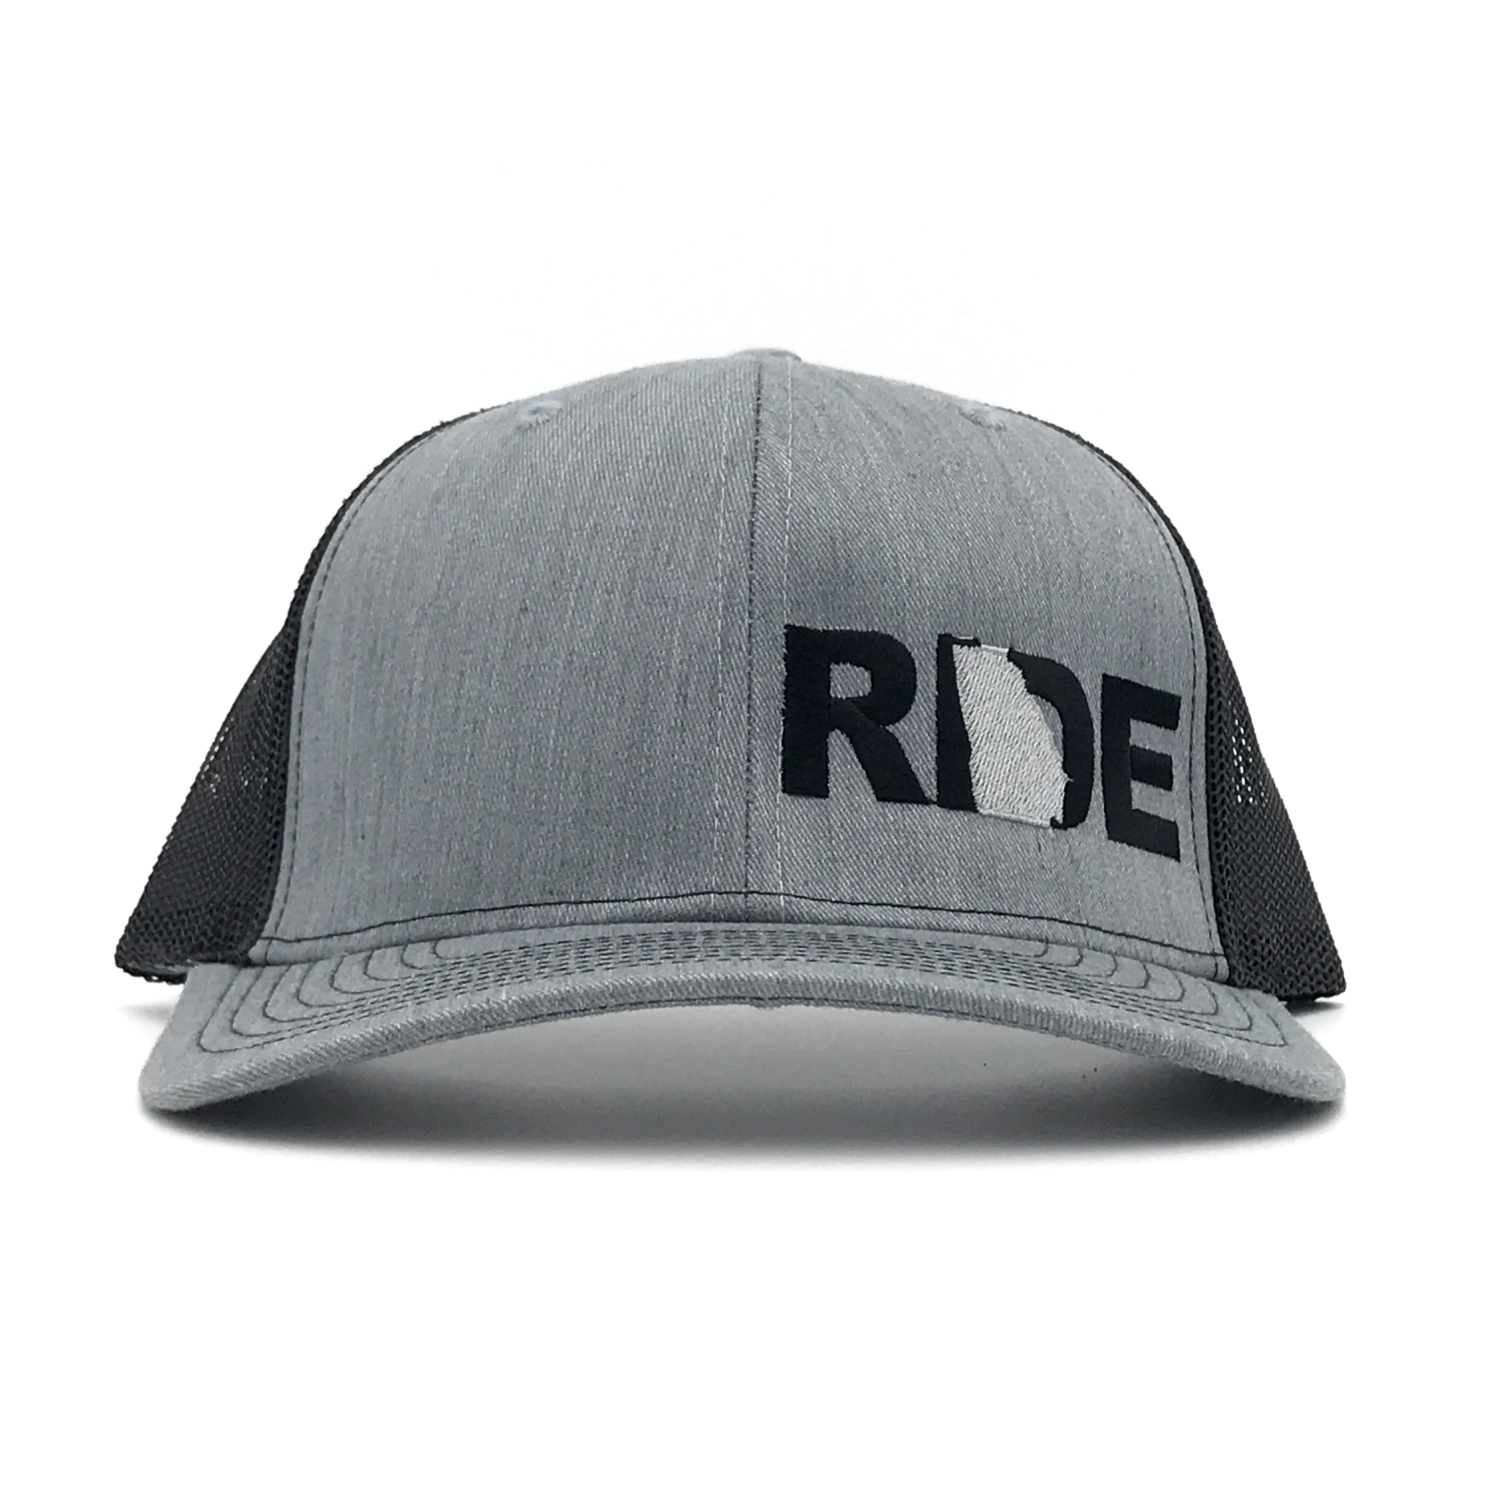 Ride Georgia Night Out Embroidered Snapback Trucker Hat Heather Gray/Black